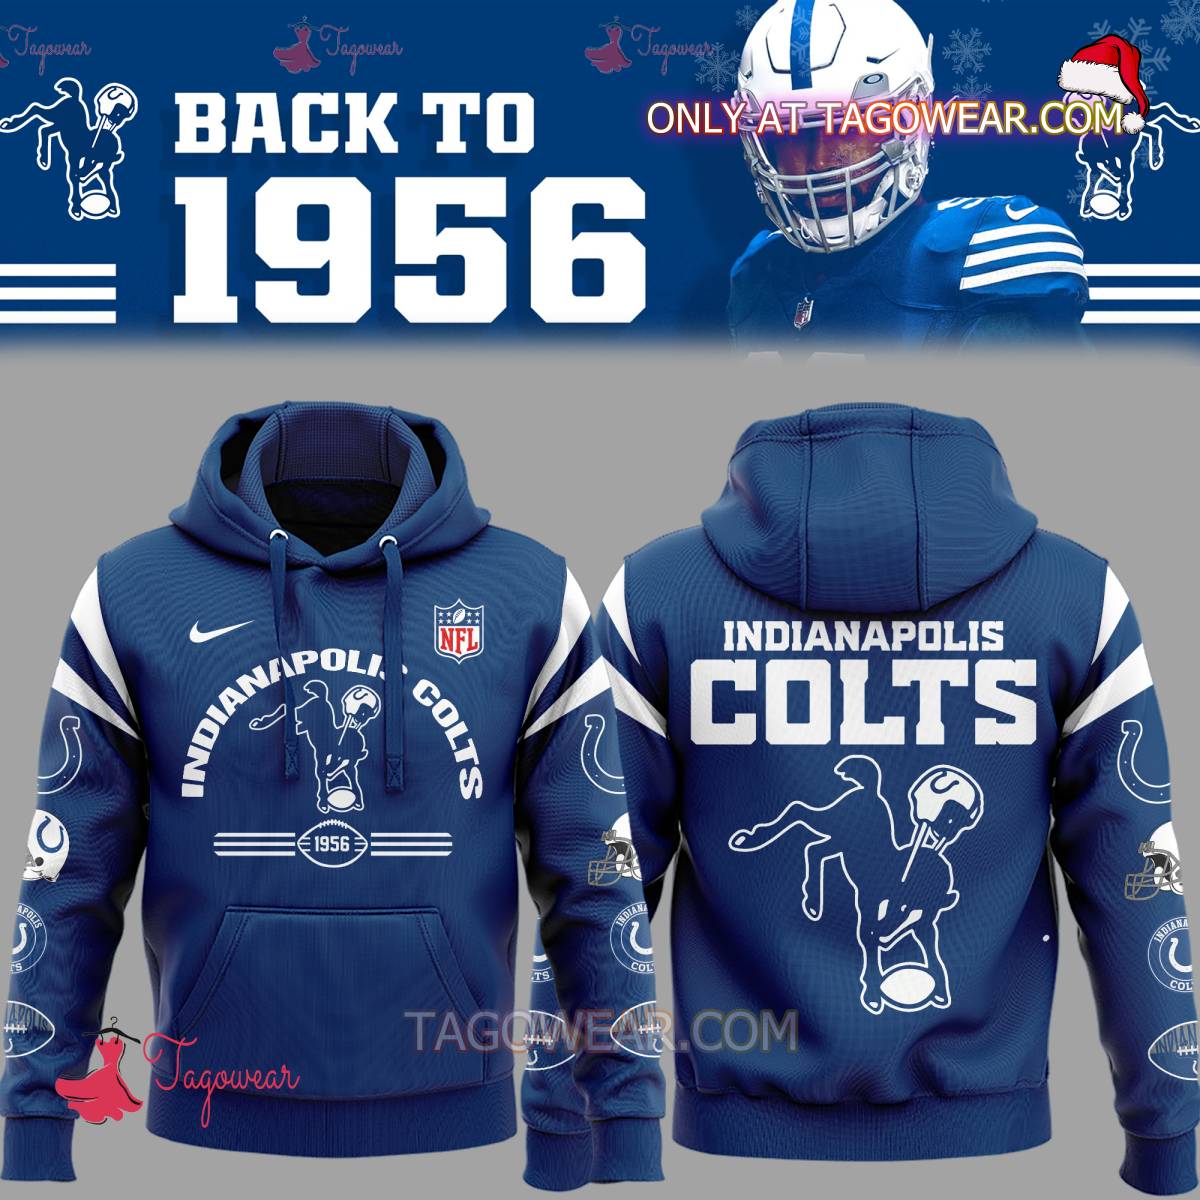 Indianapolis Colts Nfl Throwback Hoodie